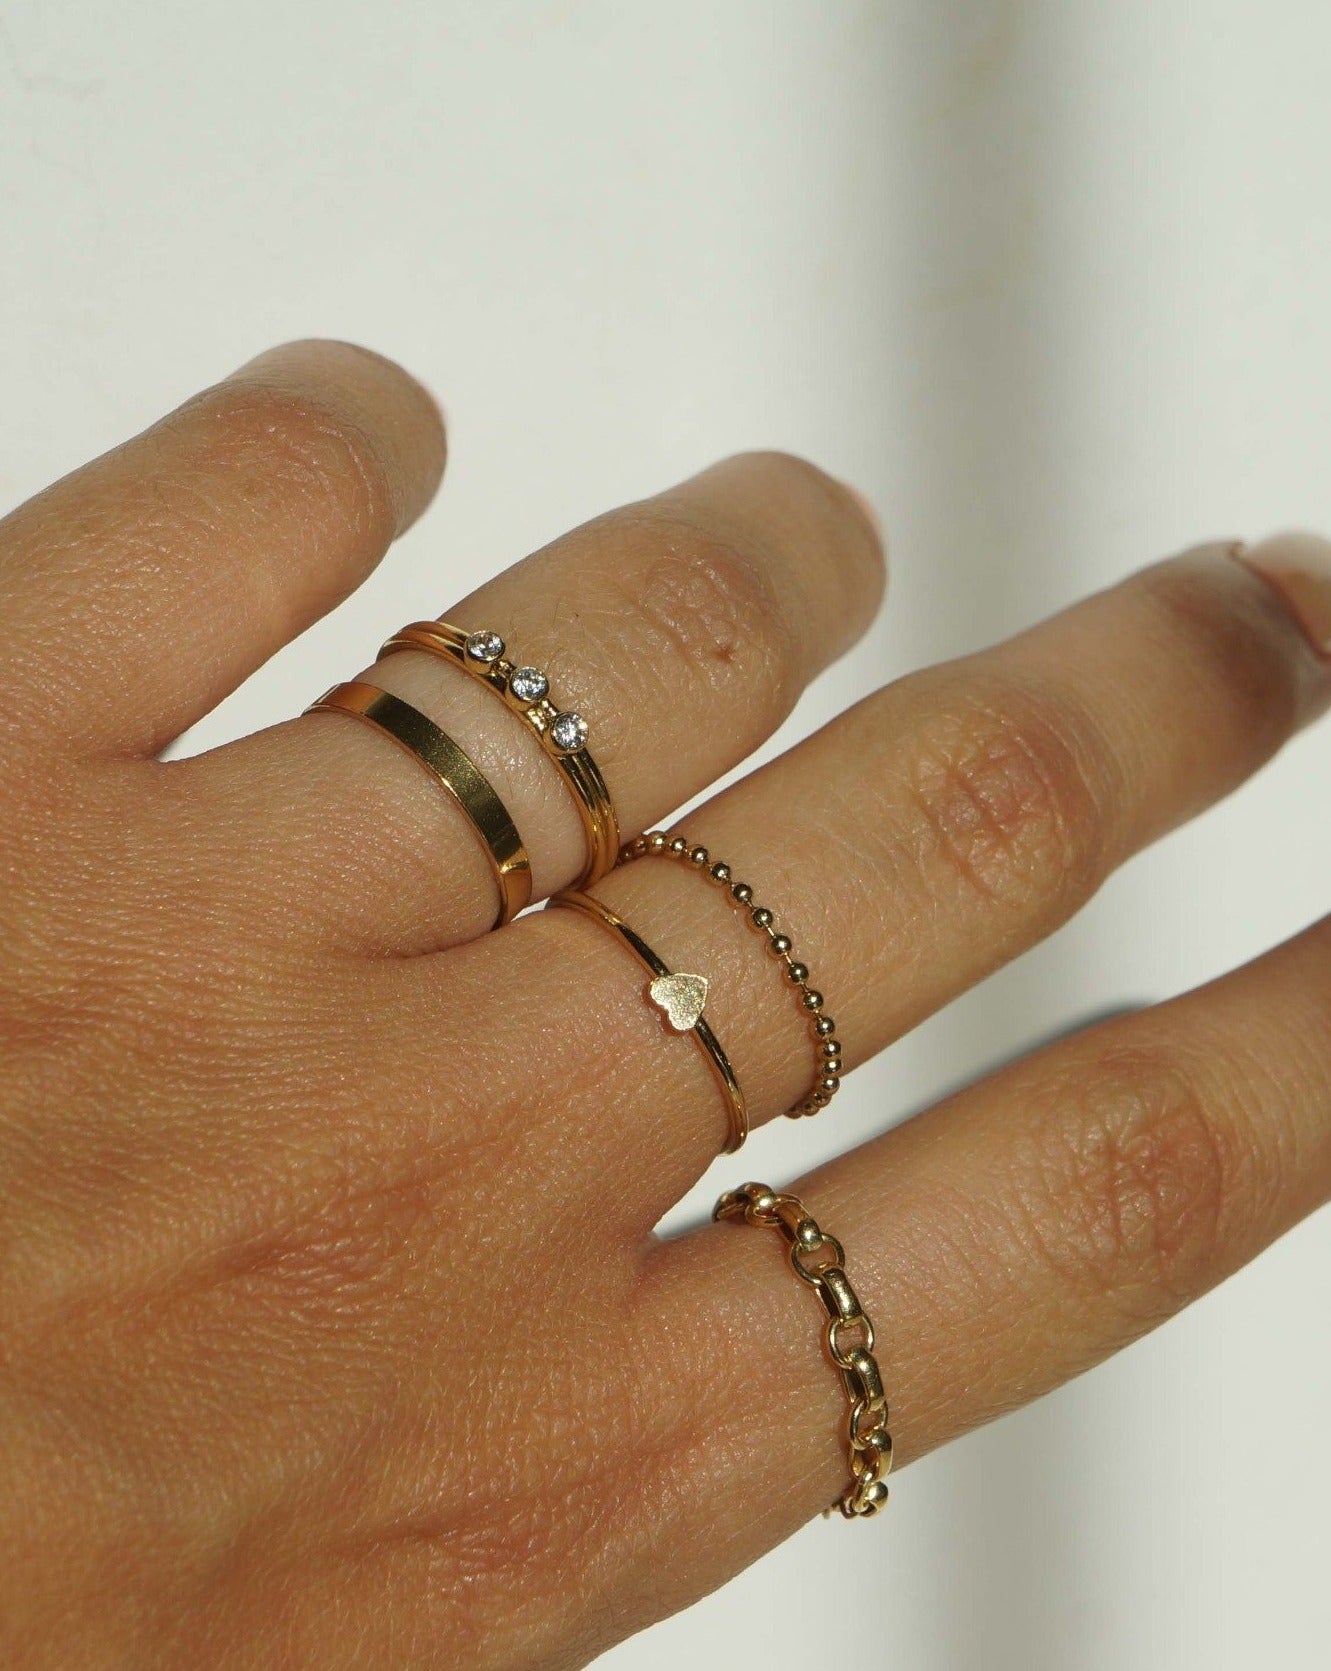 Beaded Soft Chain Ring by KOZAKH. A beaded soft chain ring, crafted in 14K Gold Filled.